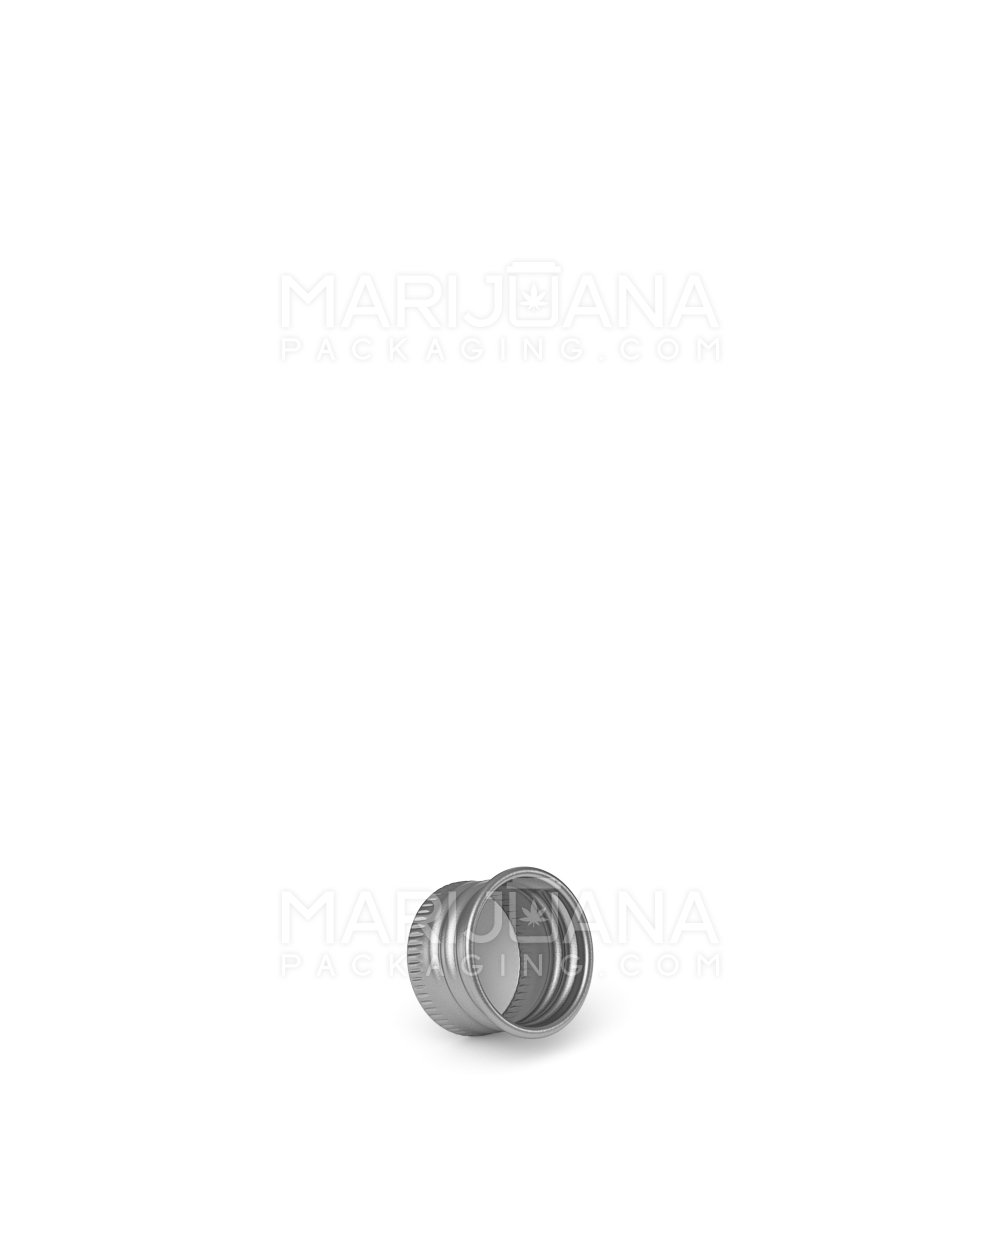 Ribbed Screw Top Metal Caps w/ Foam Liner | 18mm - Glossy Silver - 400 Count - 2